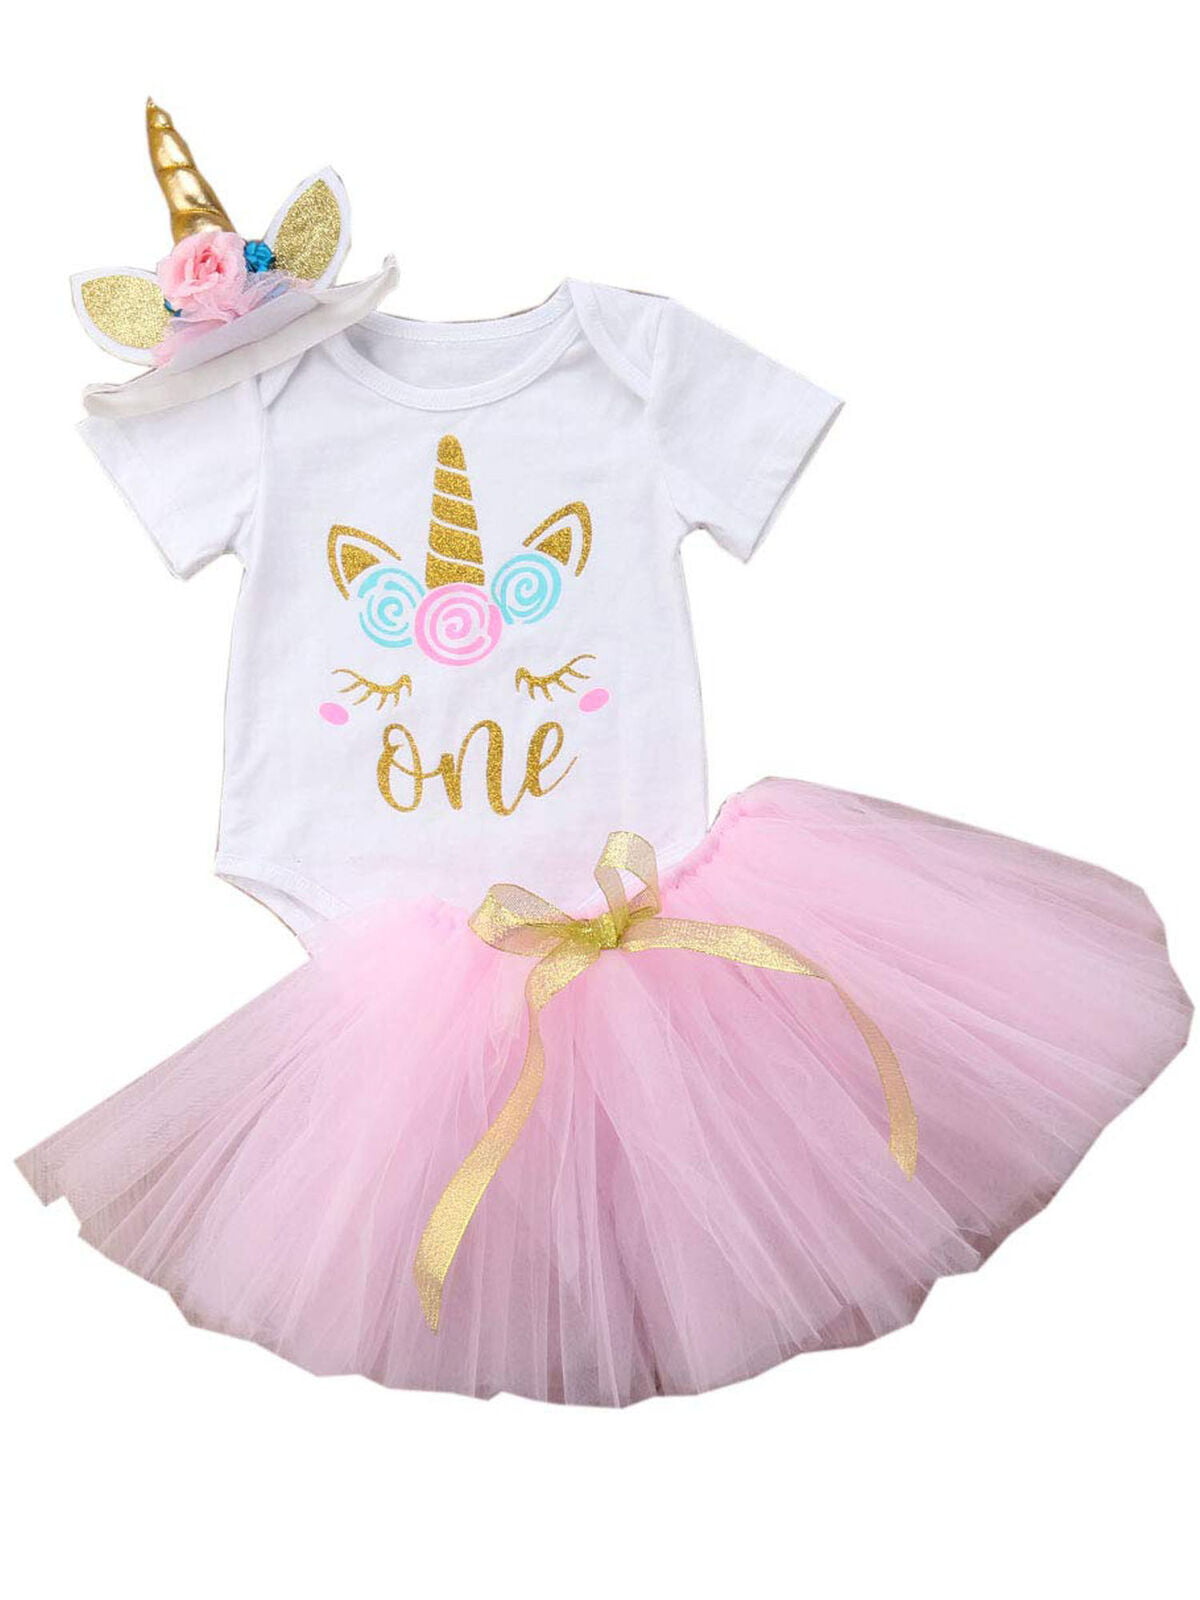 3PCS Infant Baby Girls 1st Birthday Tutu Skirts Dress Clothes Embroidered Romper 